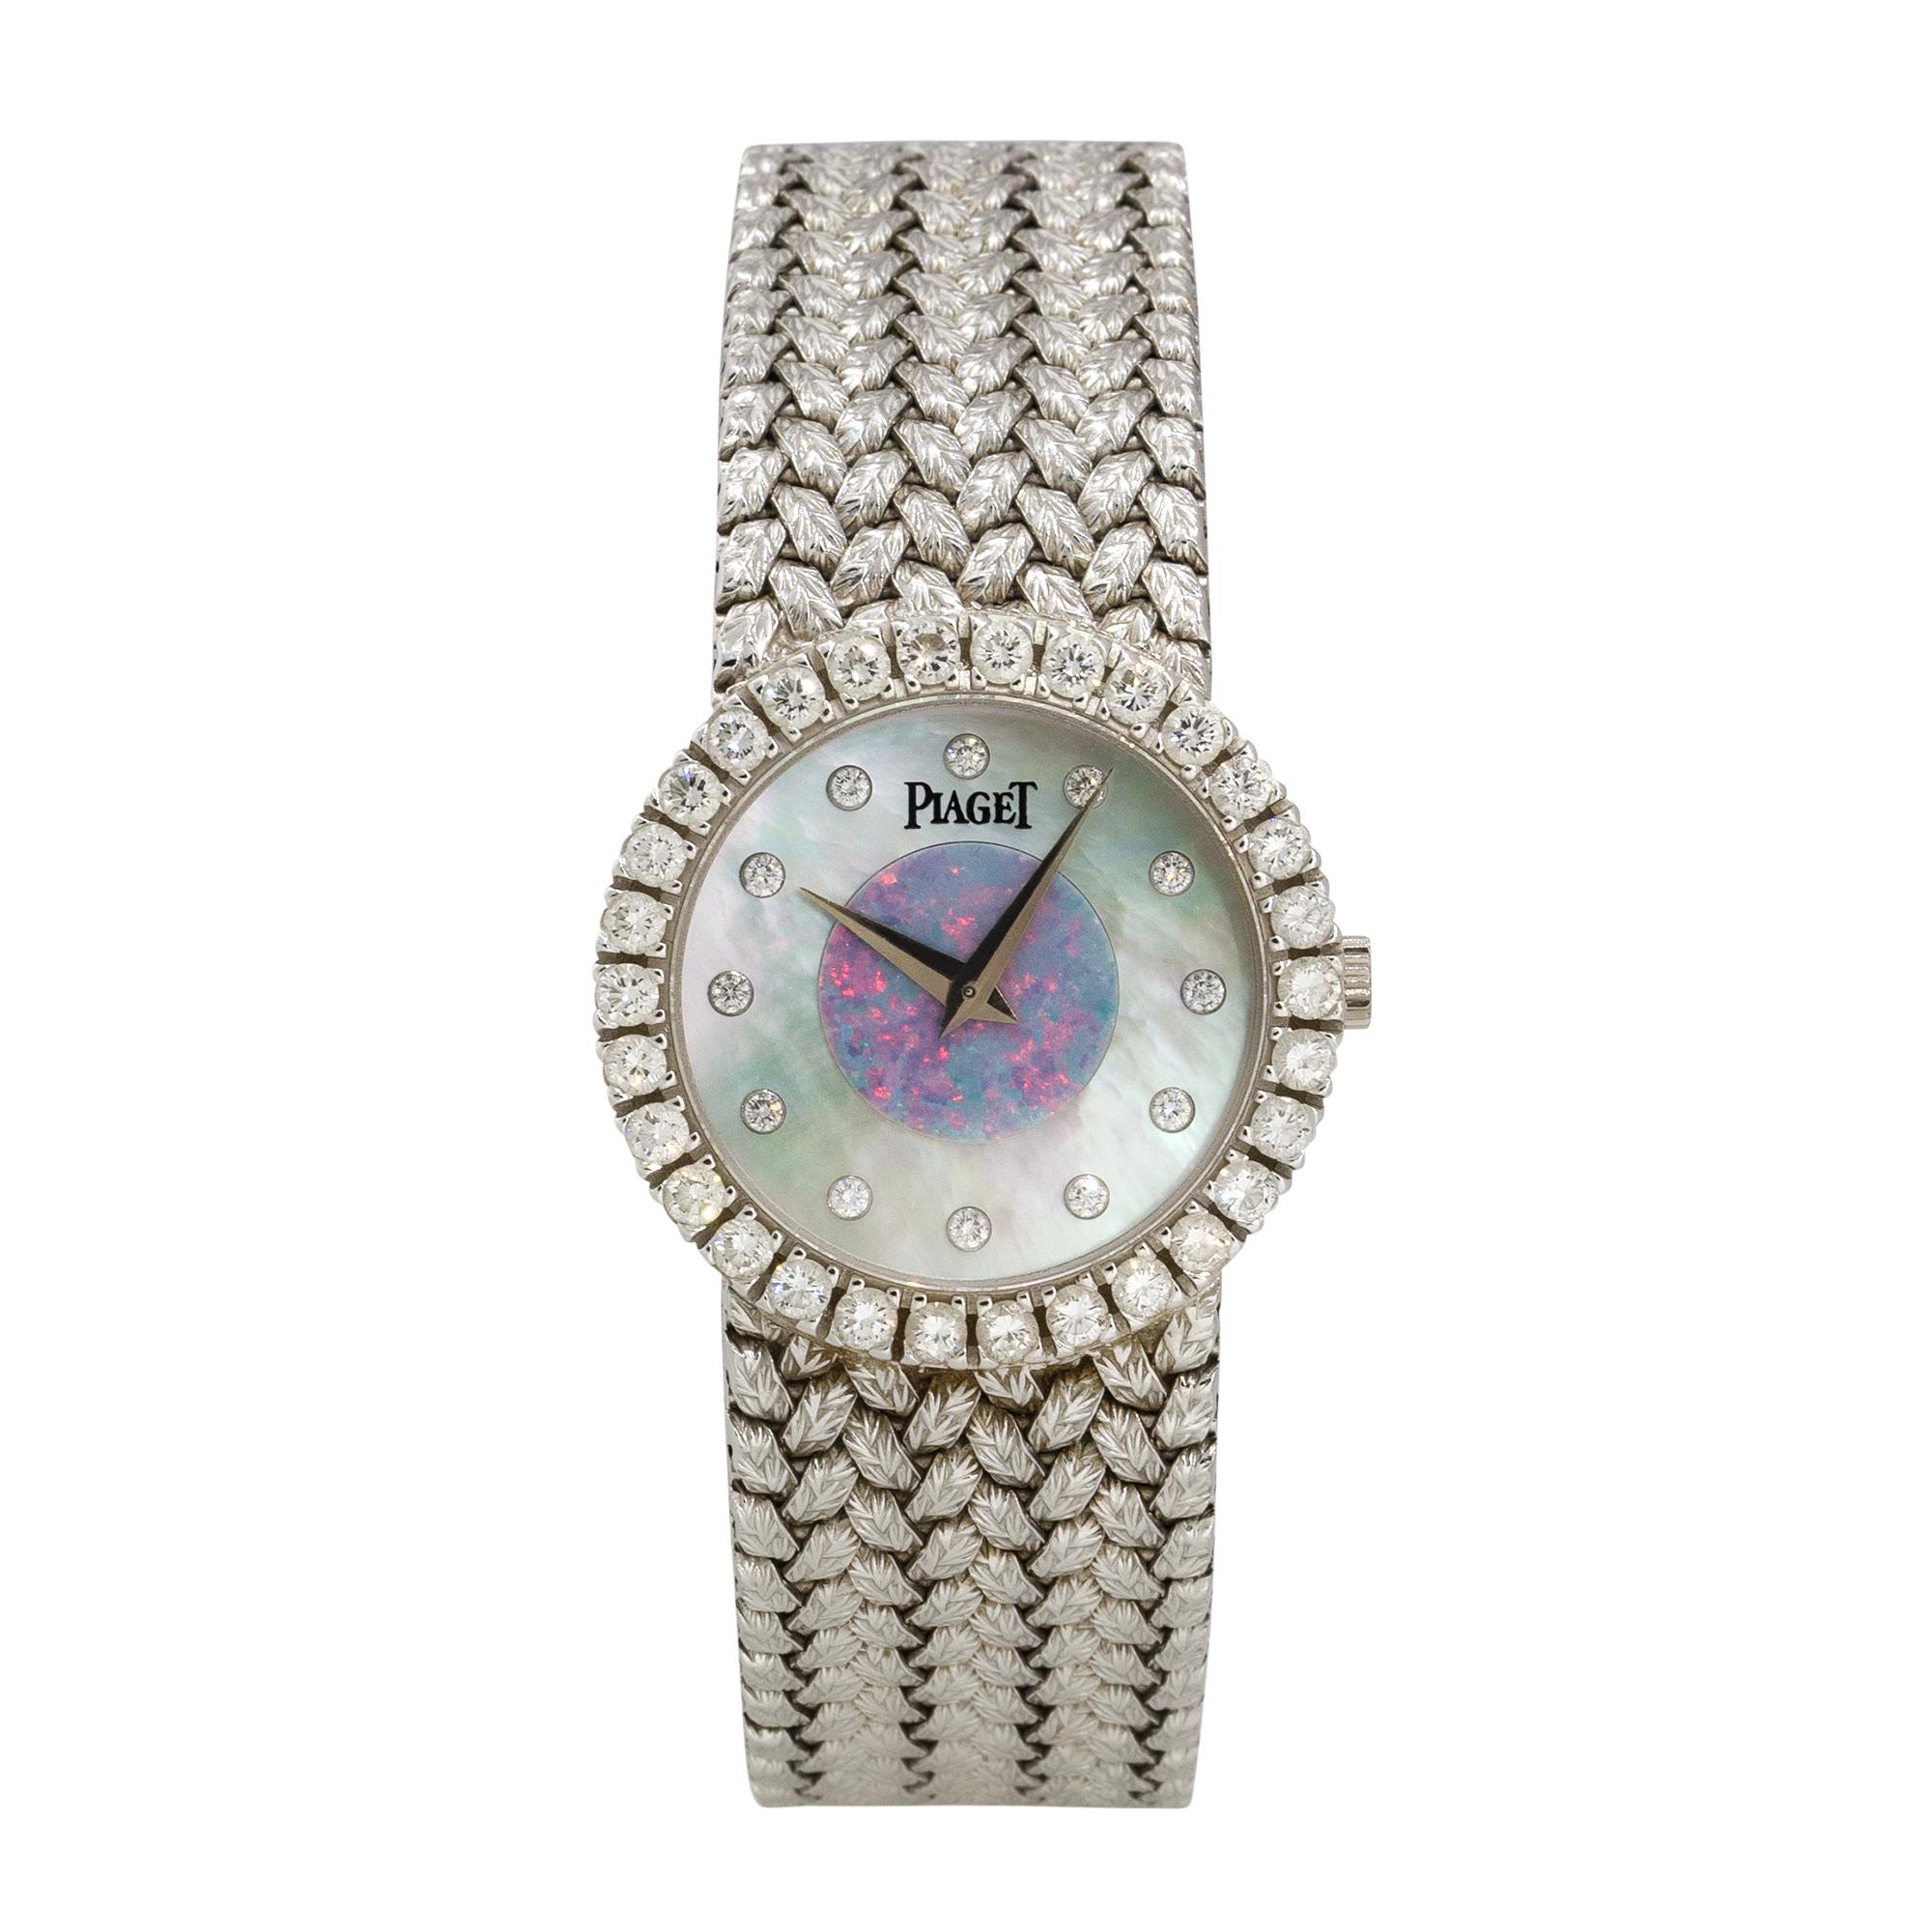 Brand: Piaget
Case Material: 18k White Gold
Case Diameter: 25.5mm
Crystal: Sapphire Crystal
Bezel: 18k White Gold bezel with Diamonds
Dial: Mother of Pearl dial with Opal center, silver hands and Diamond hour markers
Bracelet: 18k White Gold
Size: